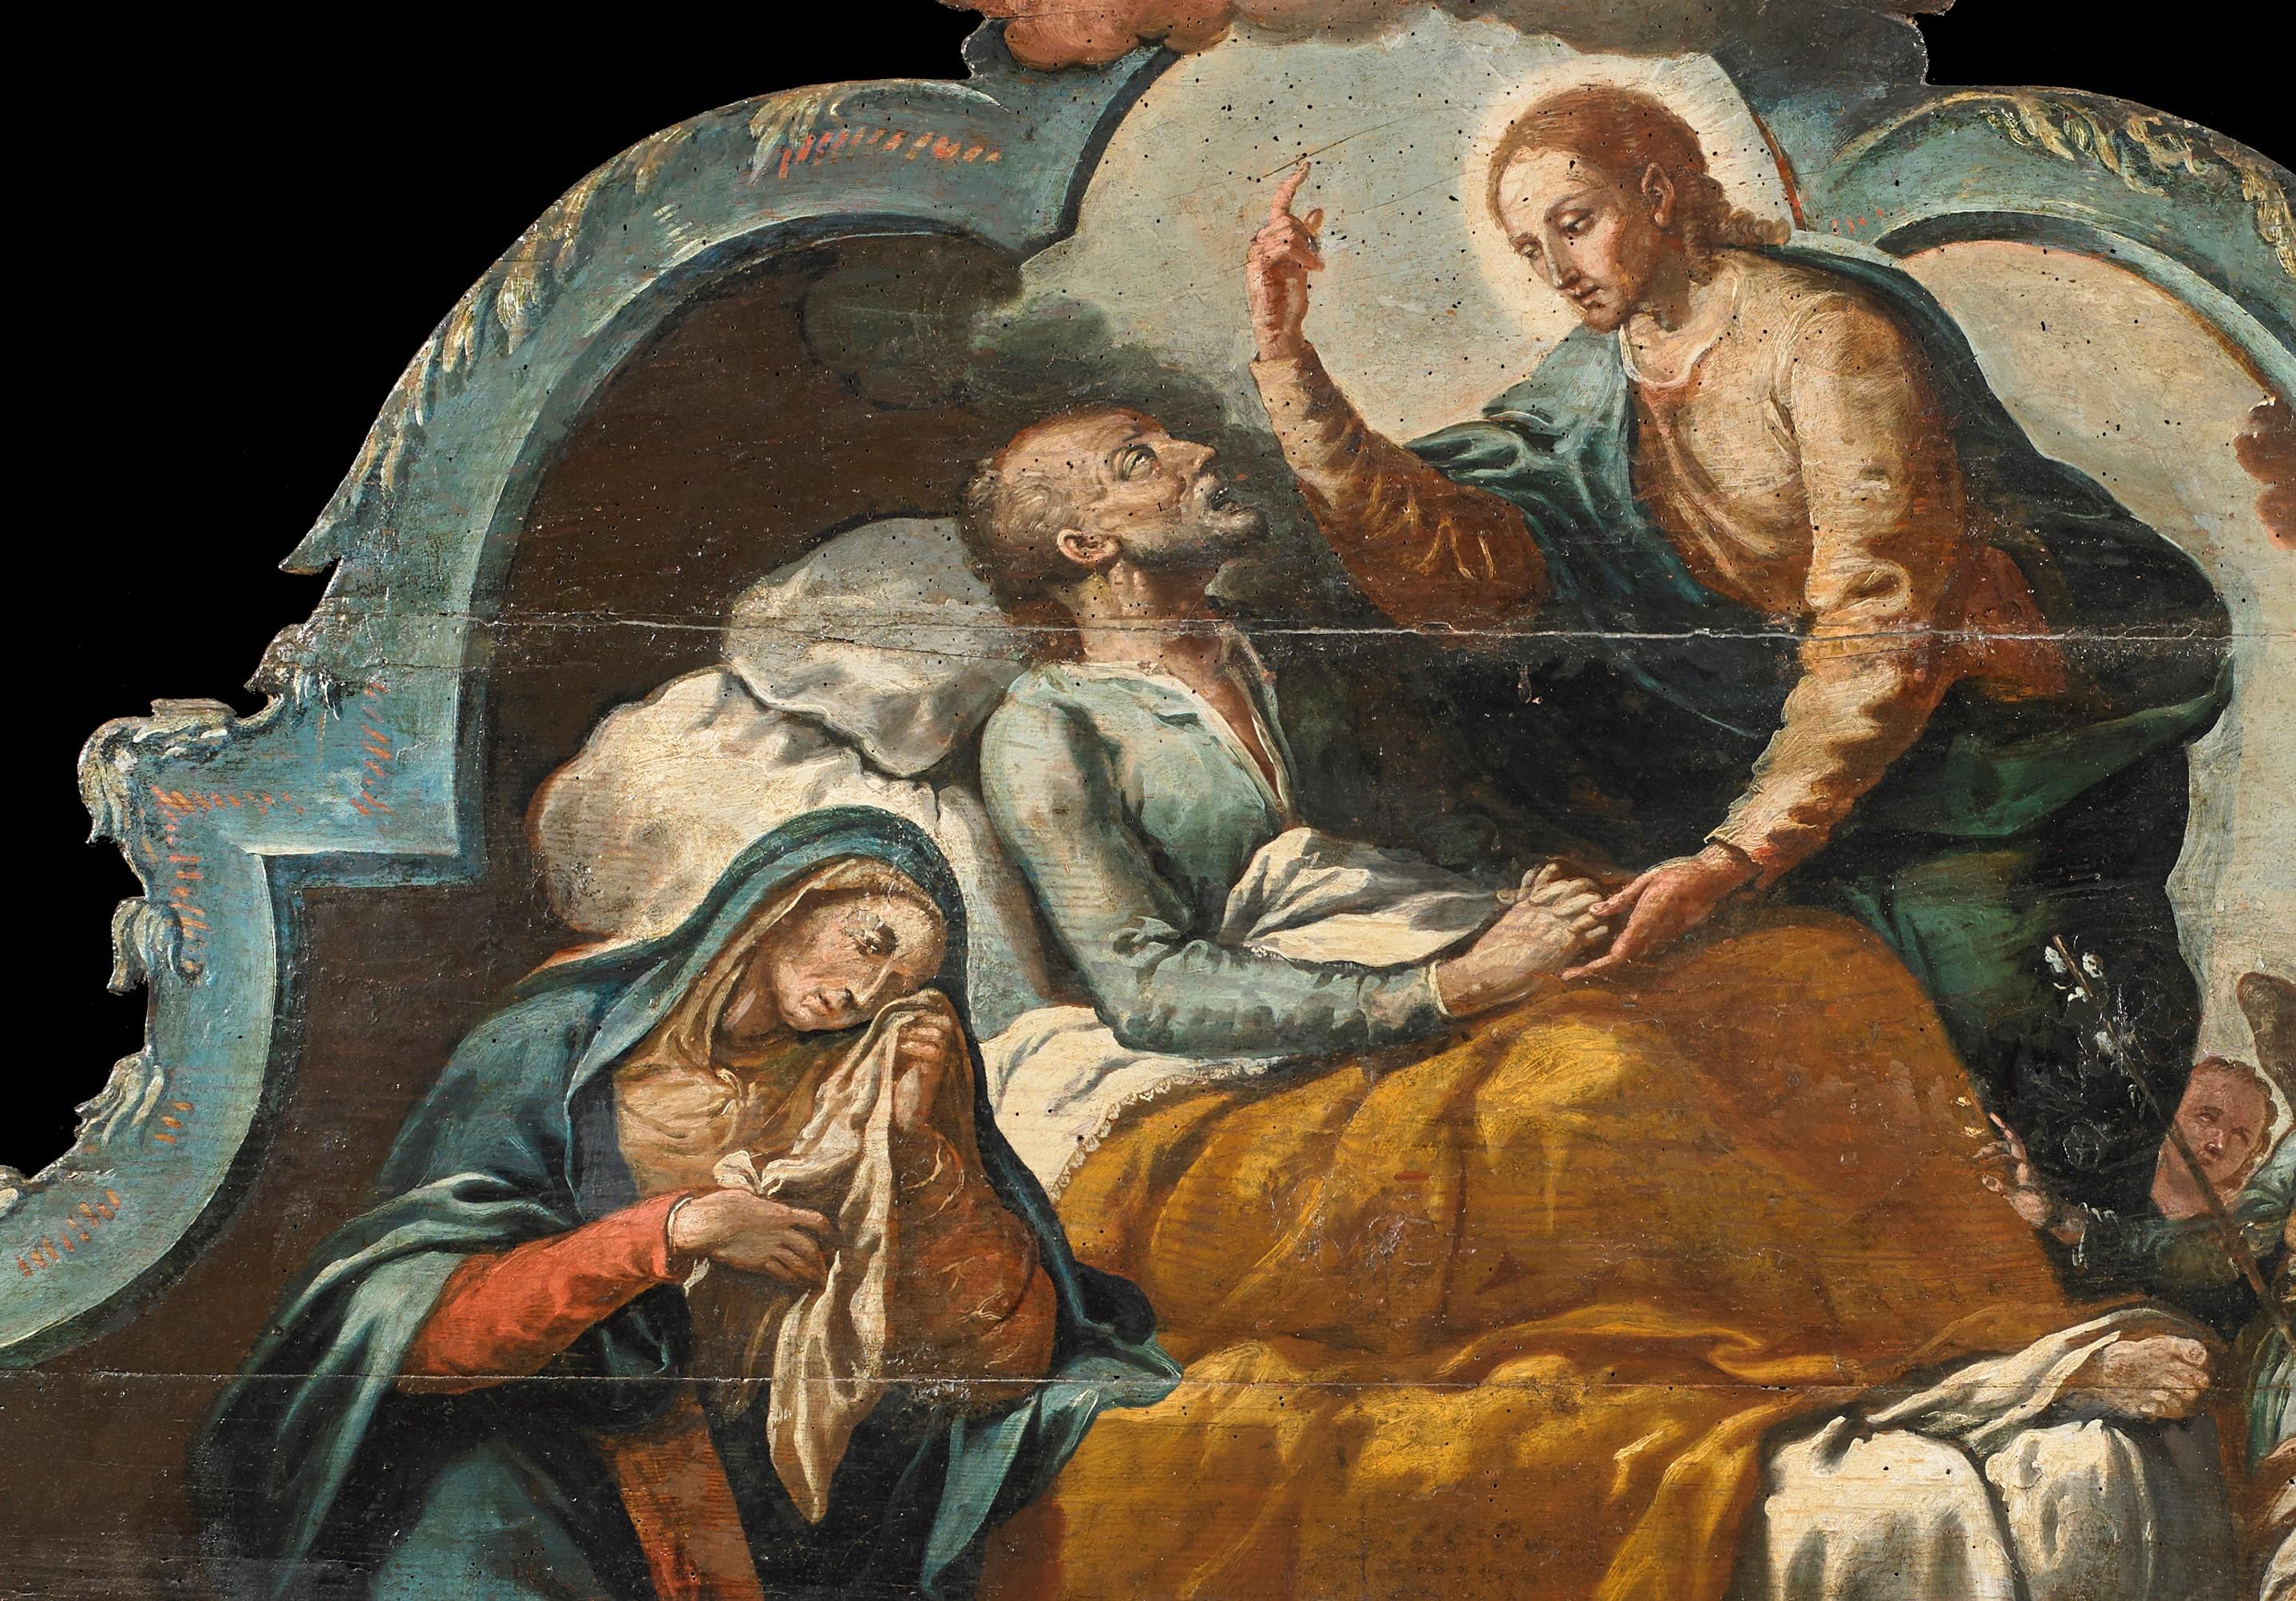 Oil painting on board from the early 1600s, also perfect as a bed headboard, measuring 100 x 160 cm from the Venetian school, depicting the death of St. Joseph.

In this work we can see the serene end of the putative father of Jesus, who died